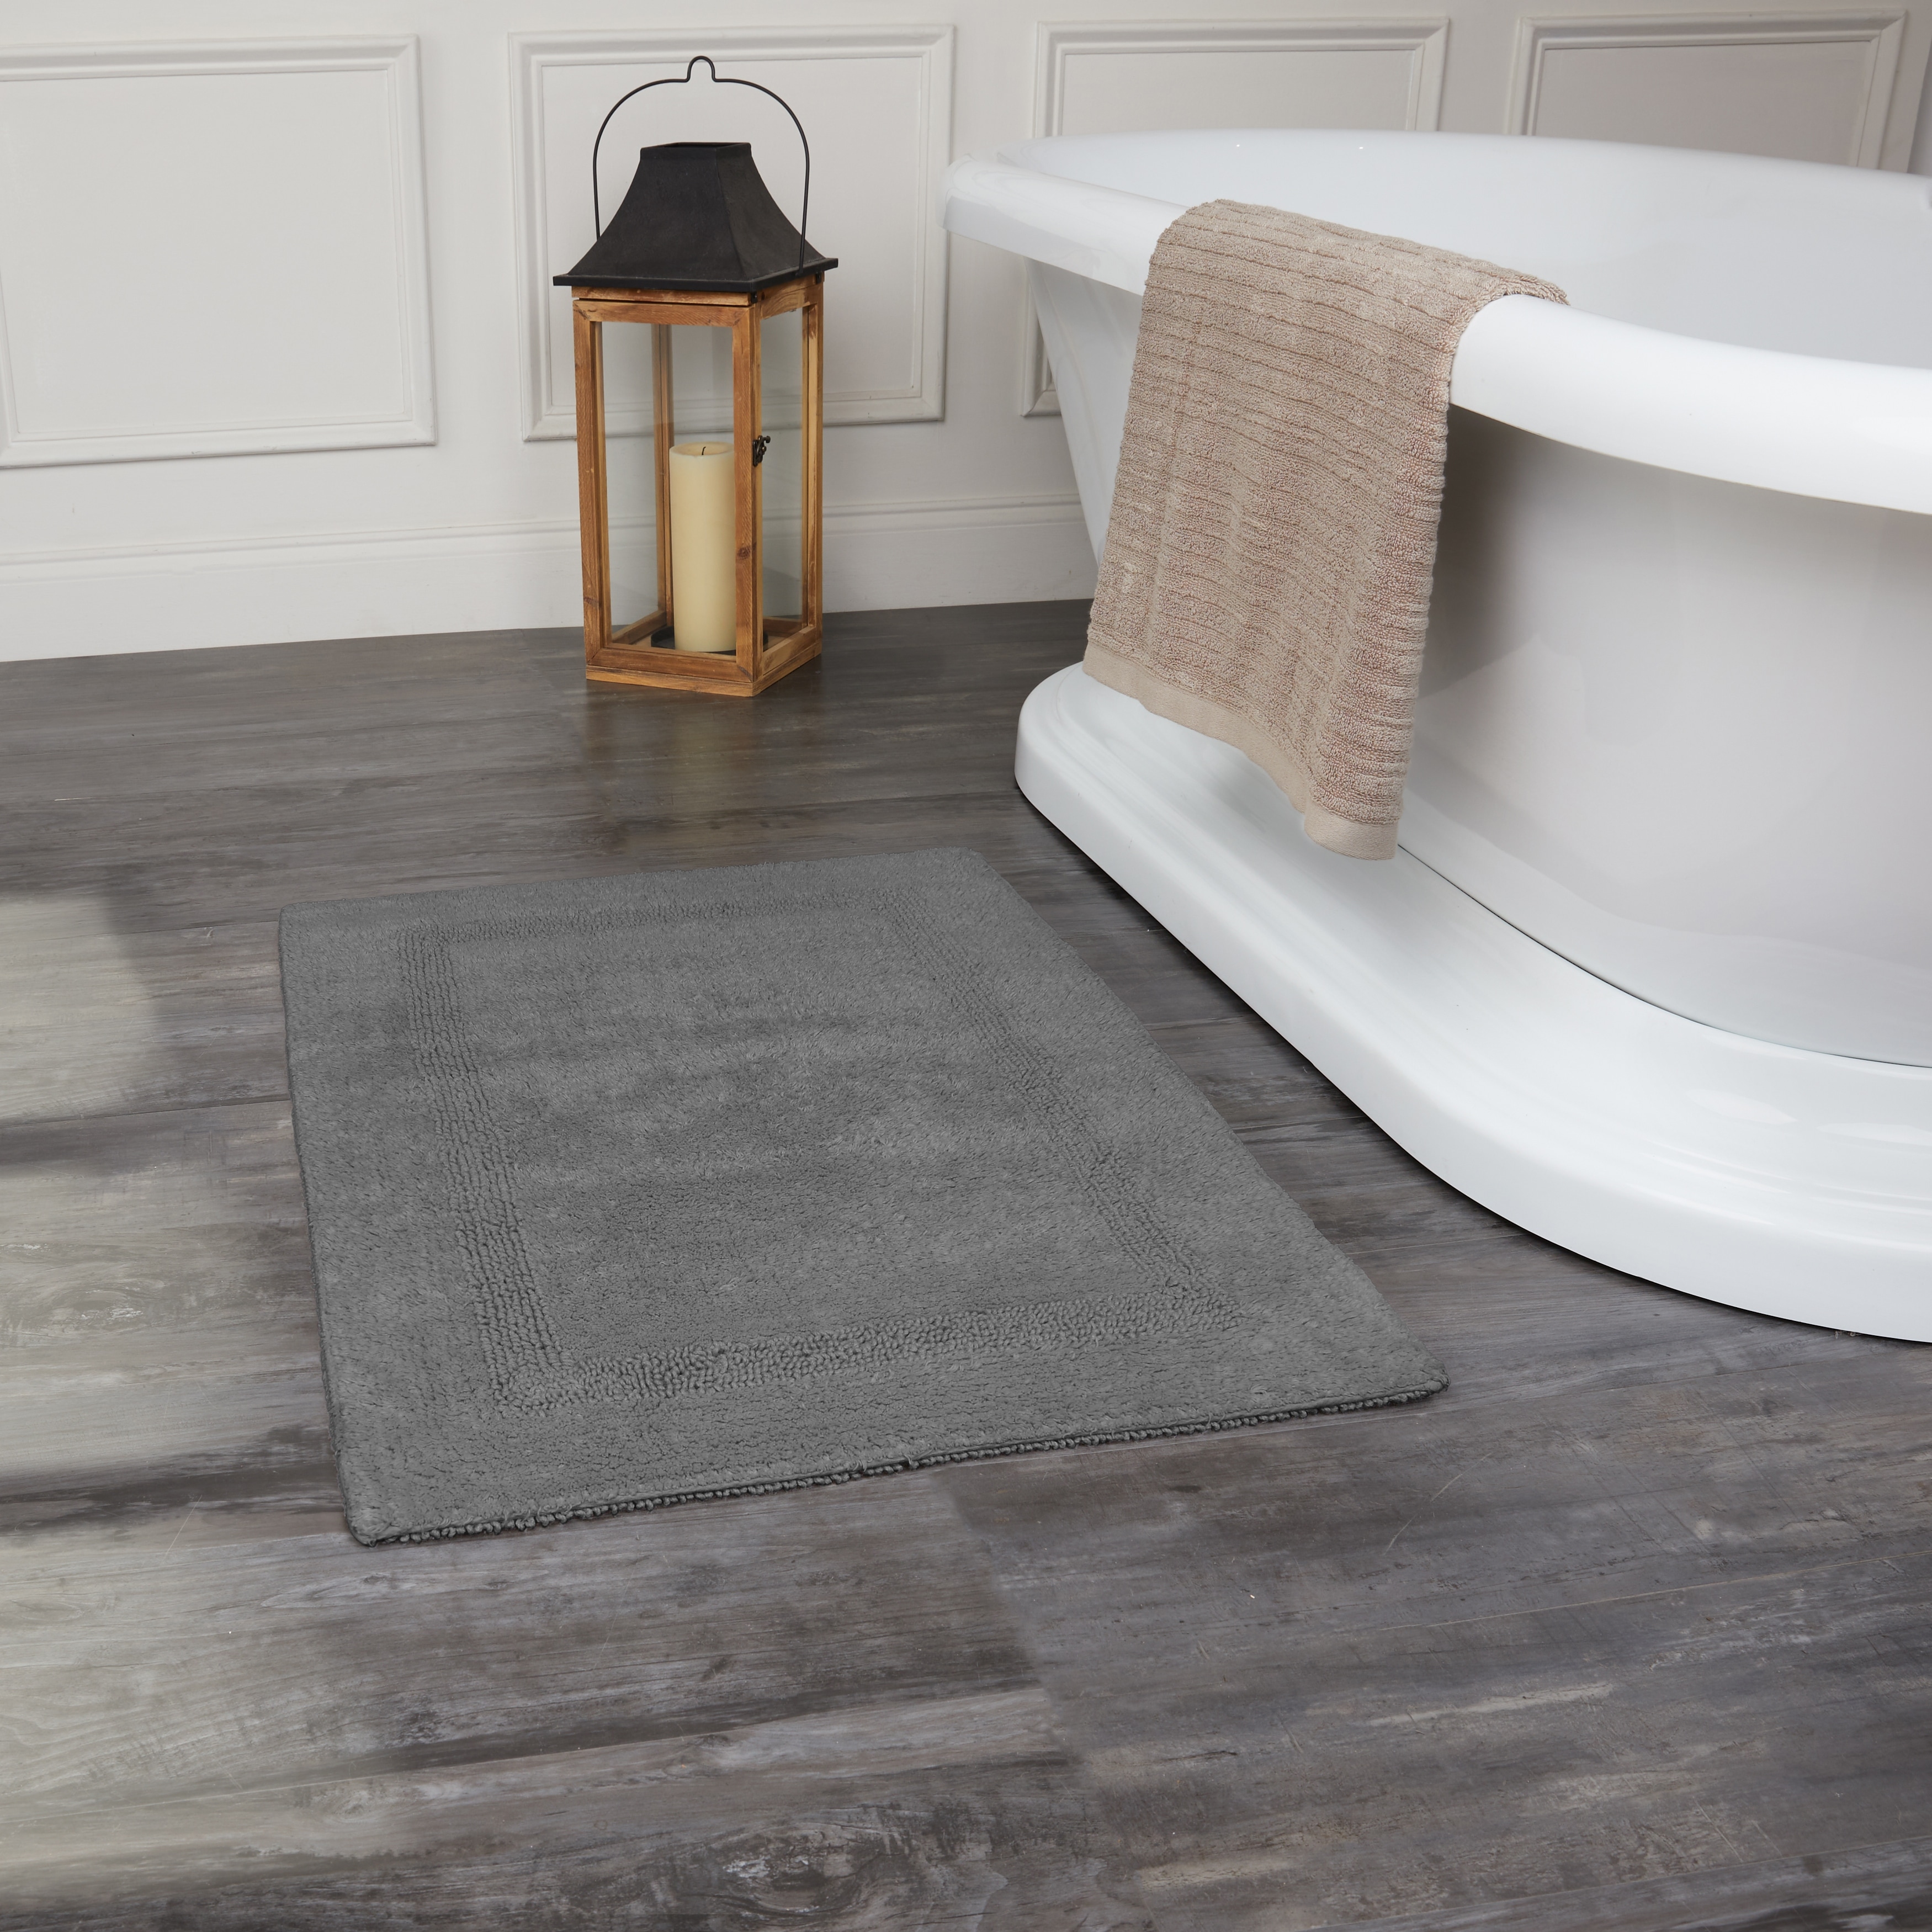 https://ak1.ostkcdn.com/images/products/is/images/direct/be73810b208fb3fa60aa5aded65561a52982295e/Fabstyles-Soft-%26-Absorbent-Reversible-Cotton-Bath-Rug.jpg